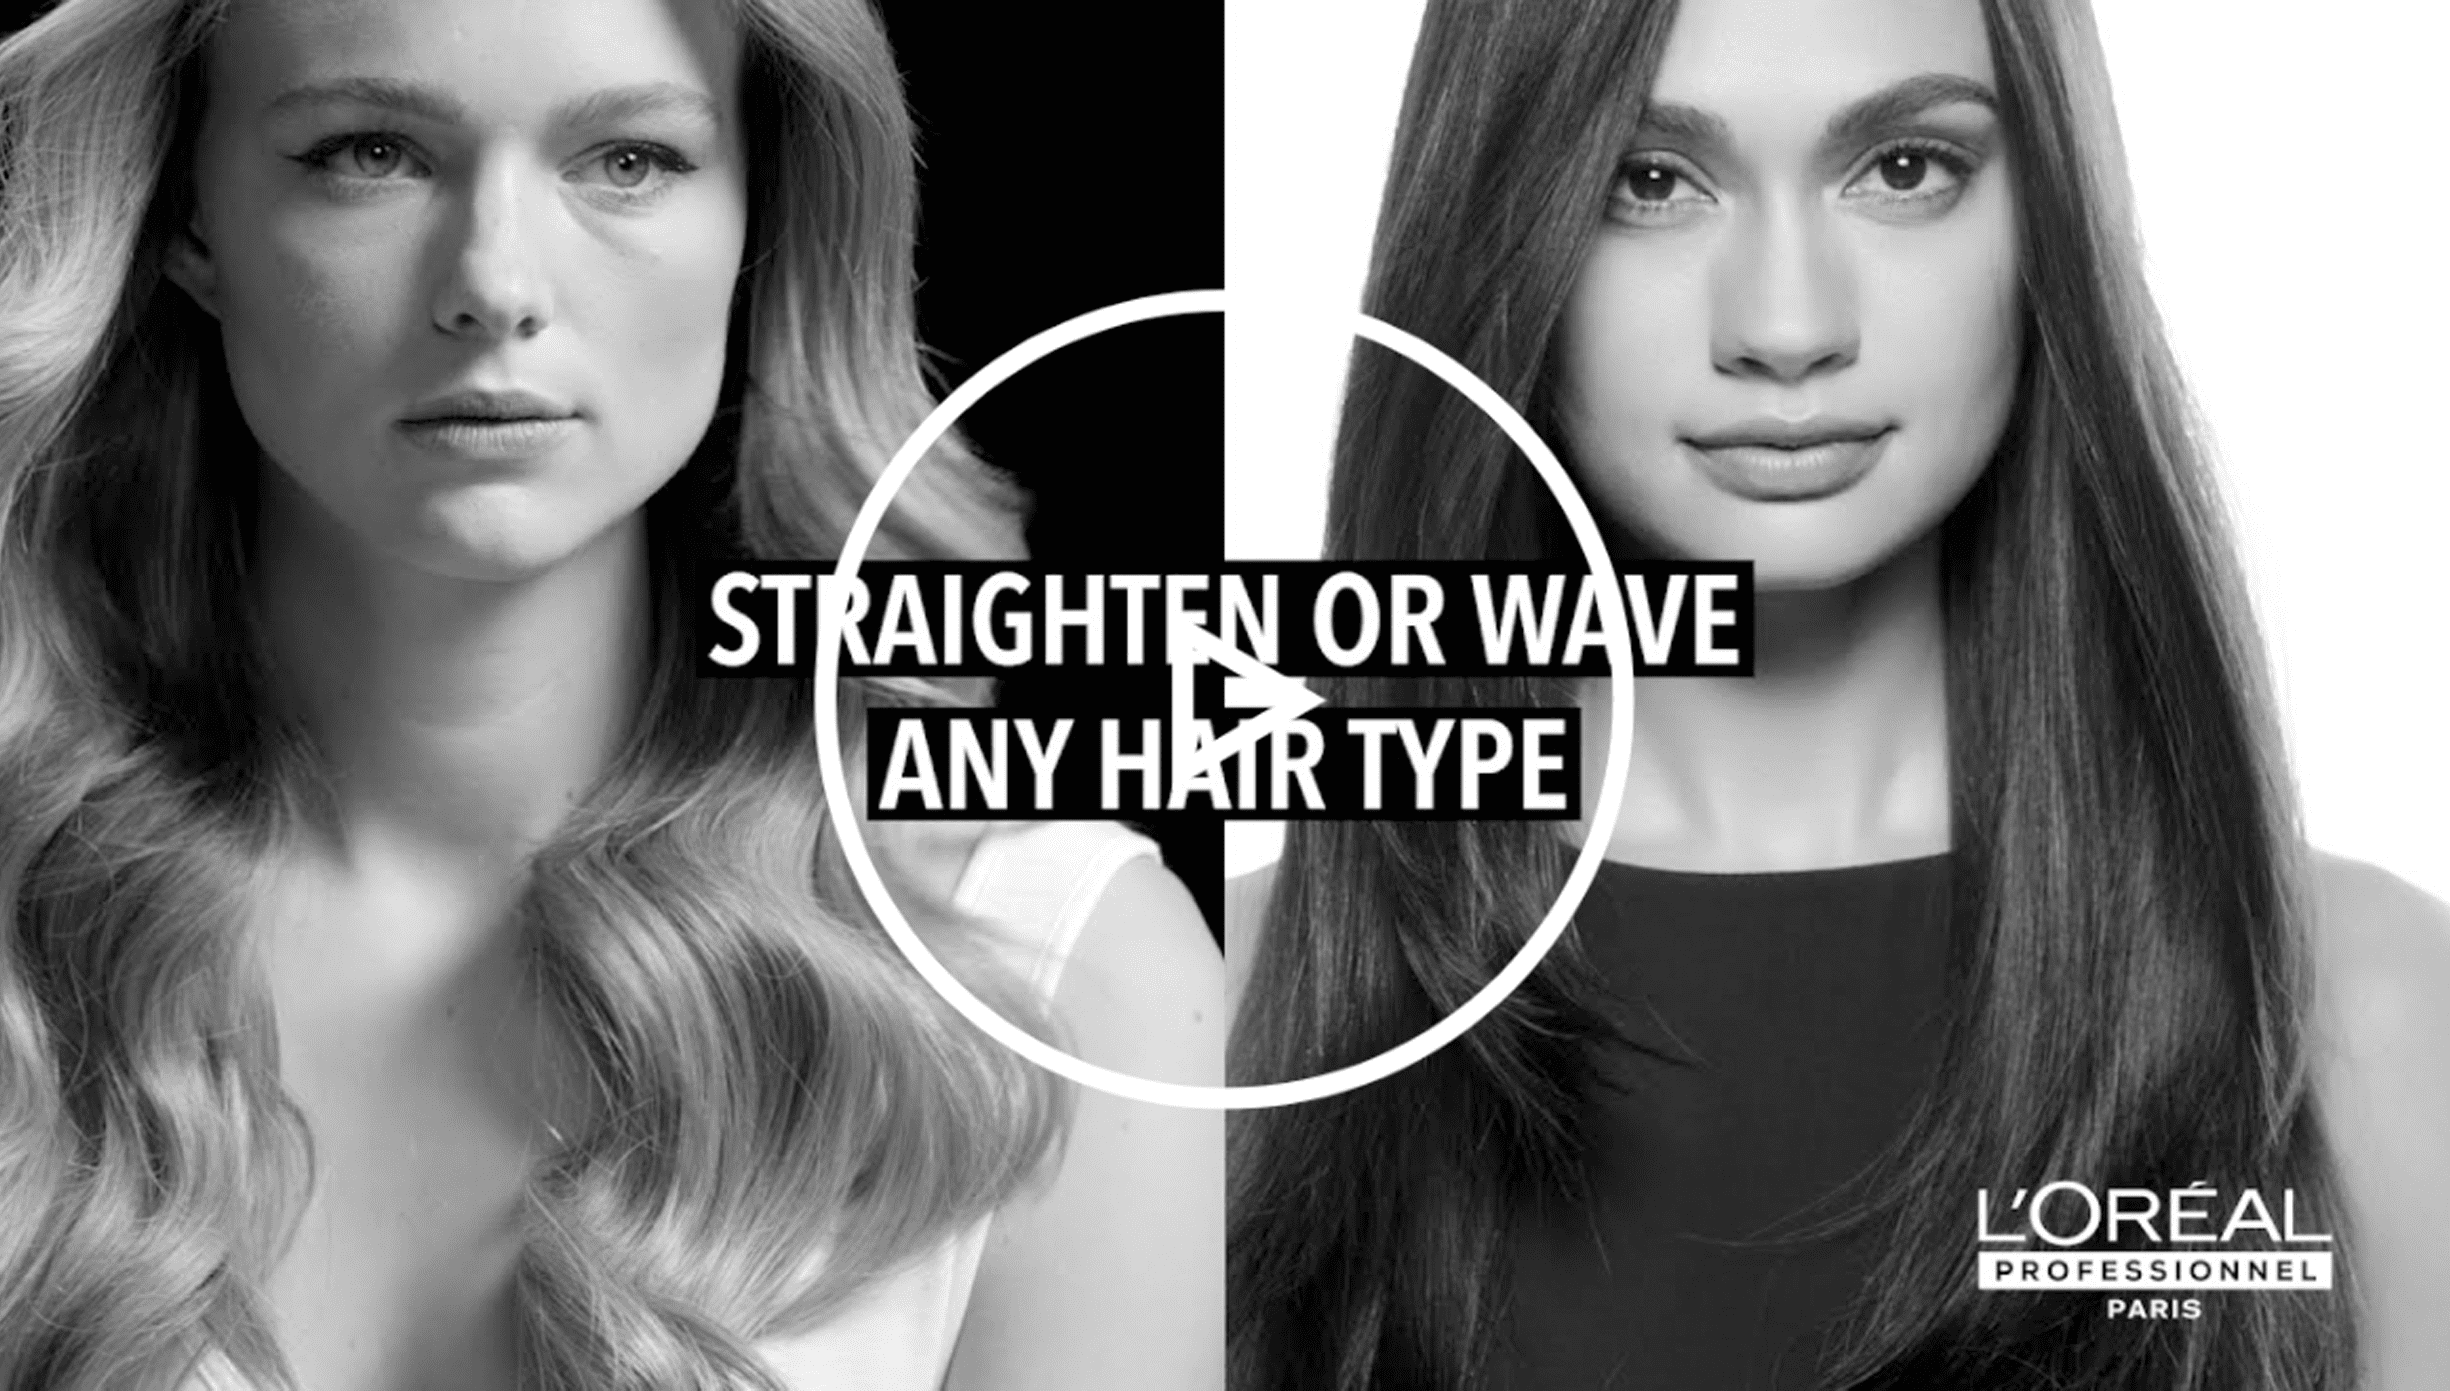 Straighten or wawe any hair type